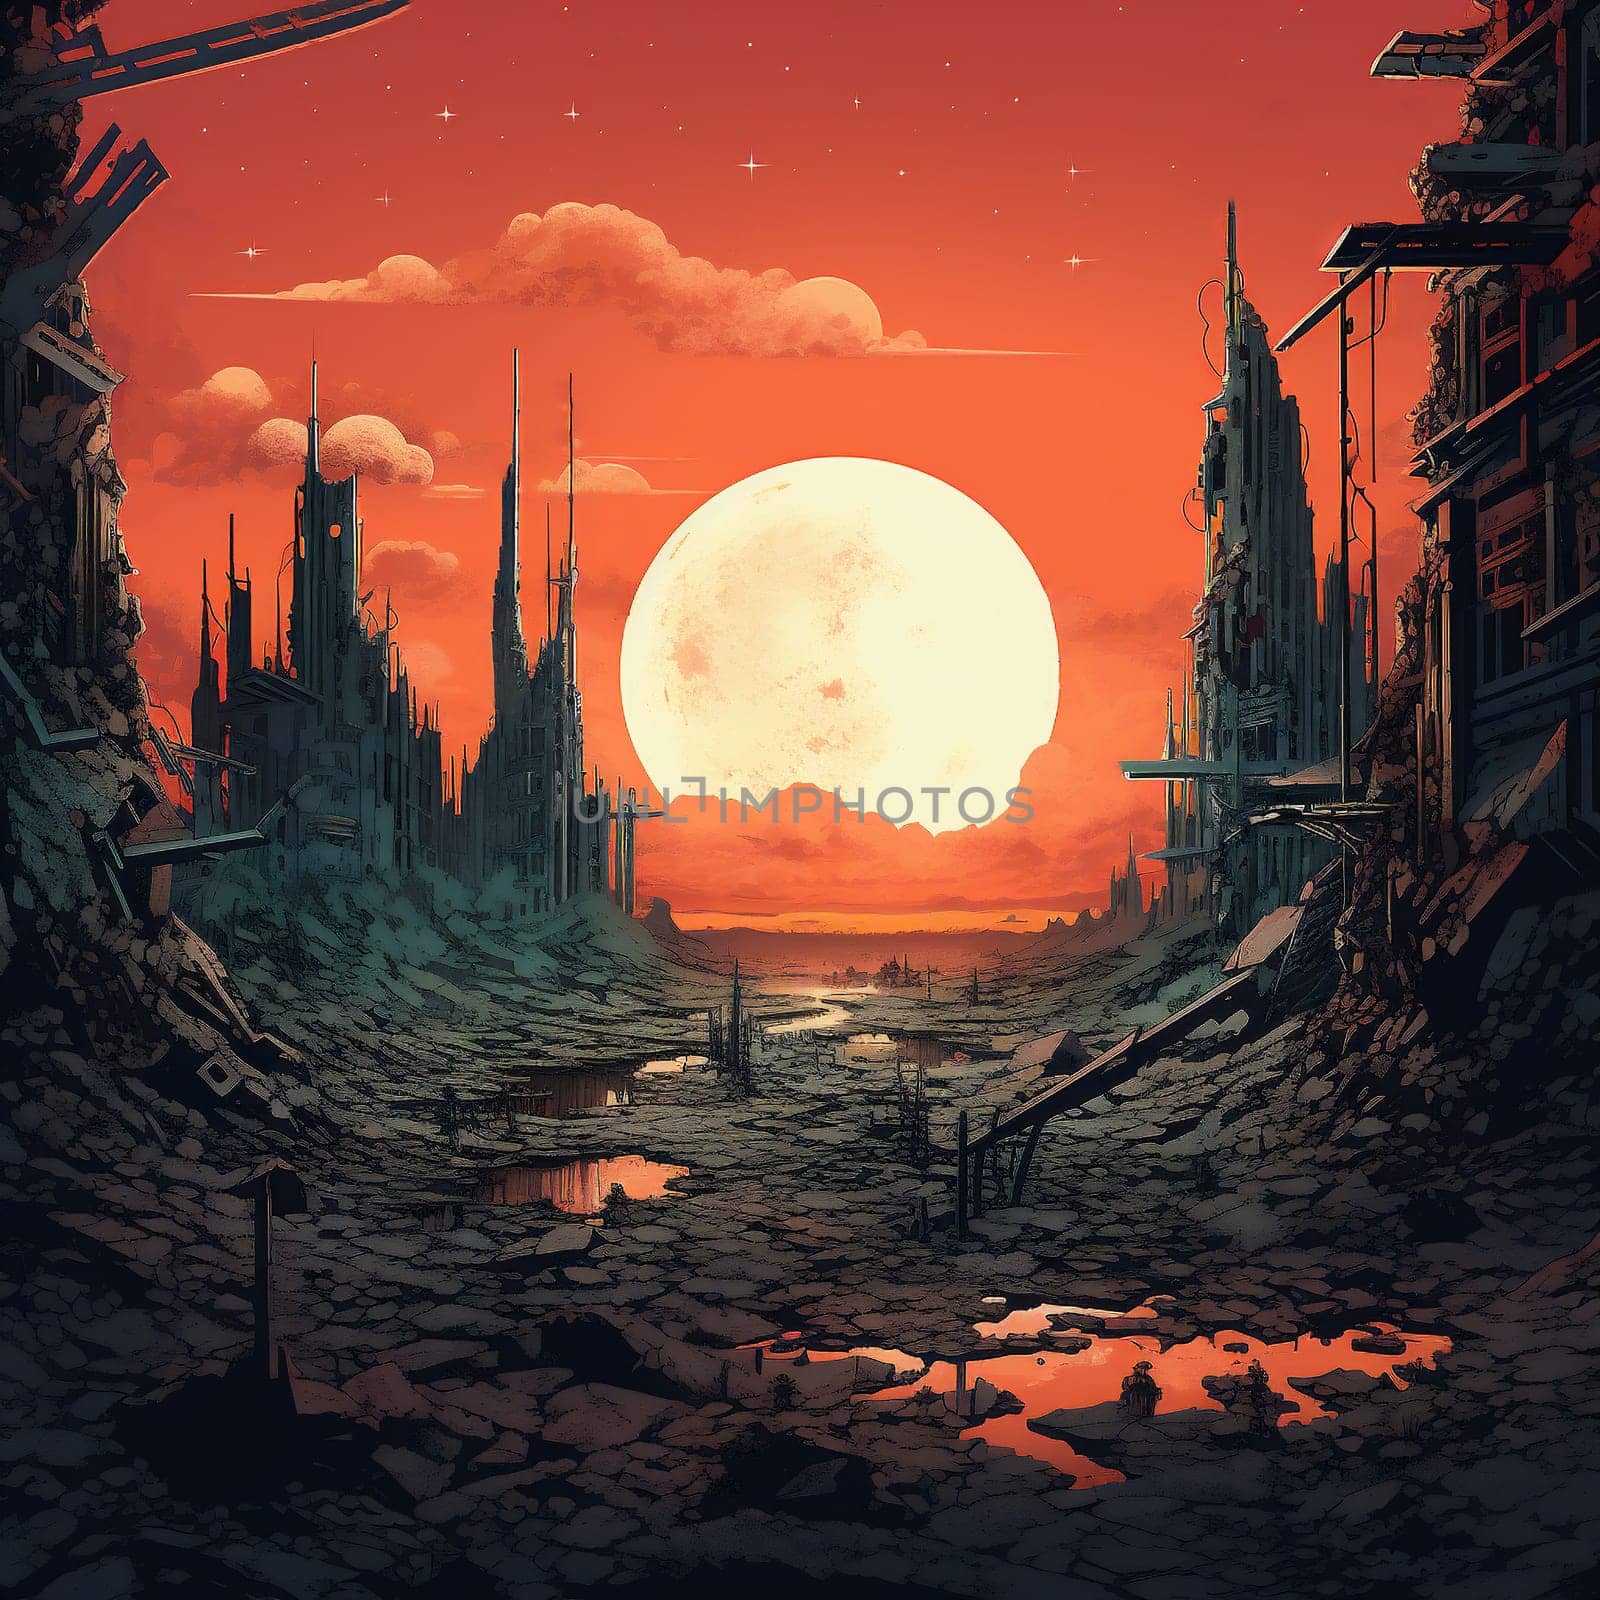 Space background, World collapse, Doomsday Scene Concept Illustration. Video Game's Digital CG Artwork, Concept Illustration with Ruins. Destroyed City against the Backdrop of Sunset. Huge Yellow Sun in the Red Sky.